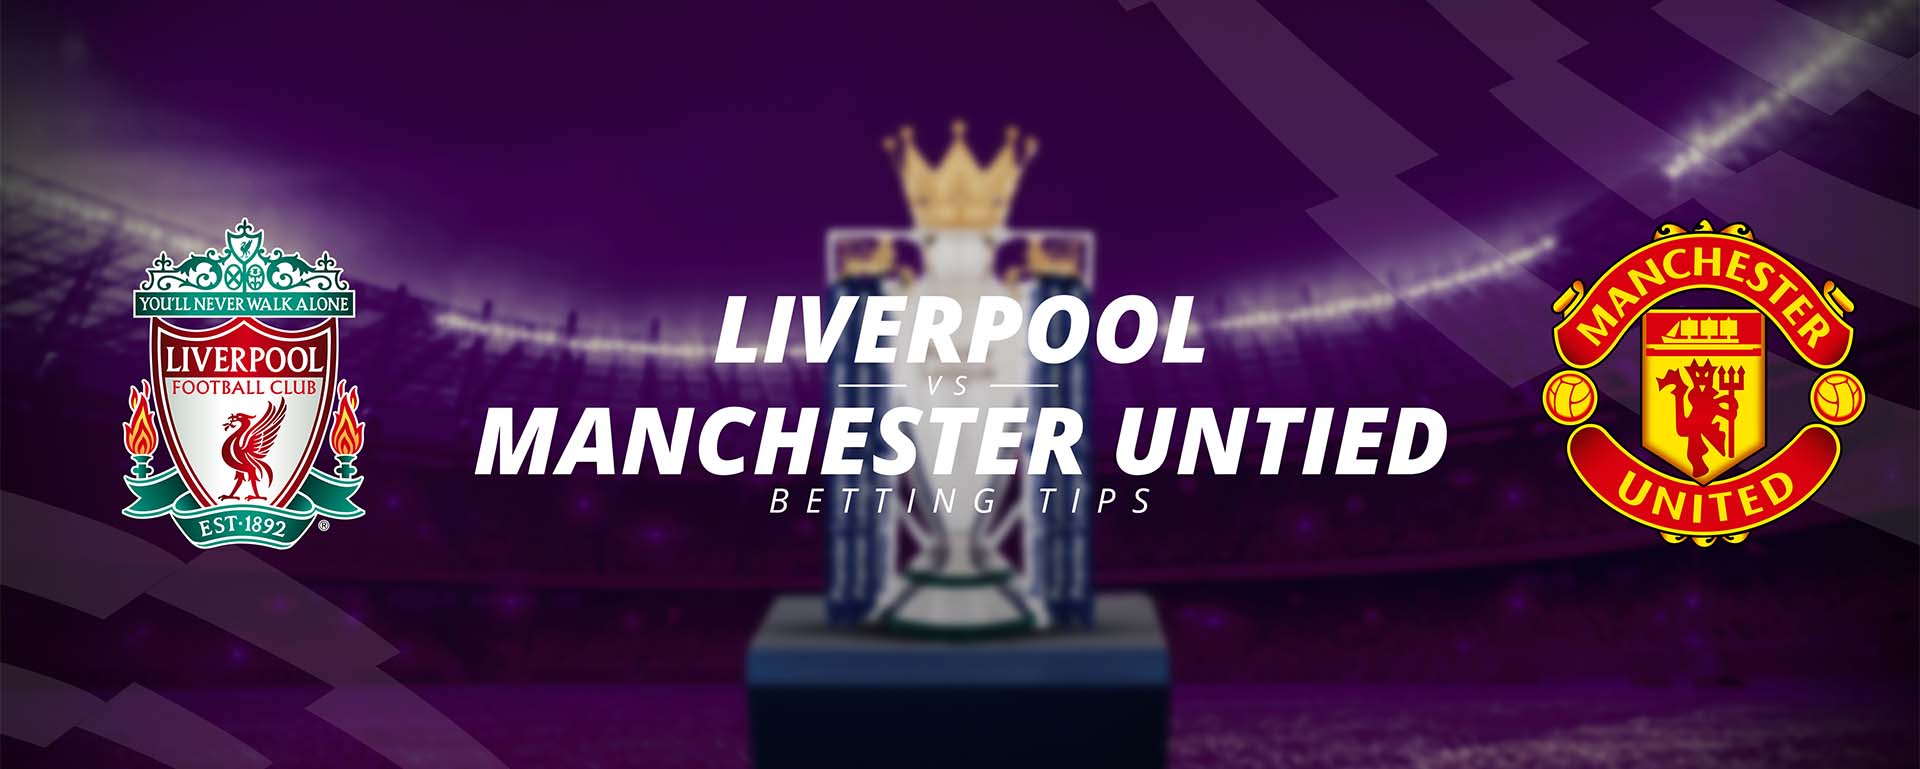 LIVERPOOL VS MANCHESTER UNITED: BETTING TIPS